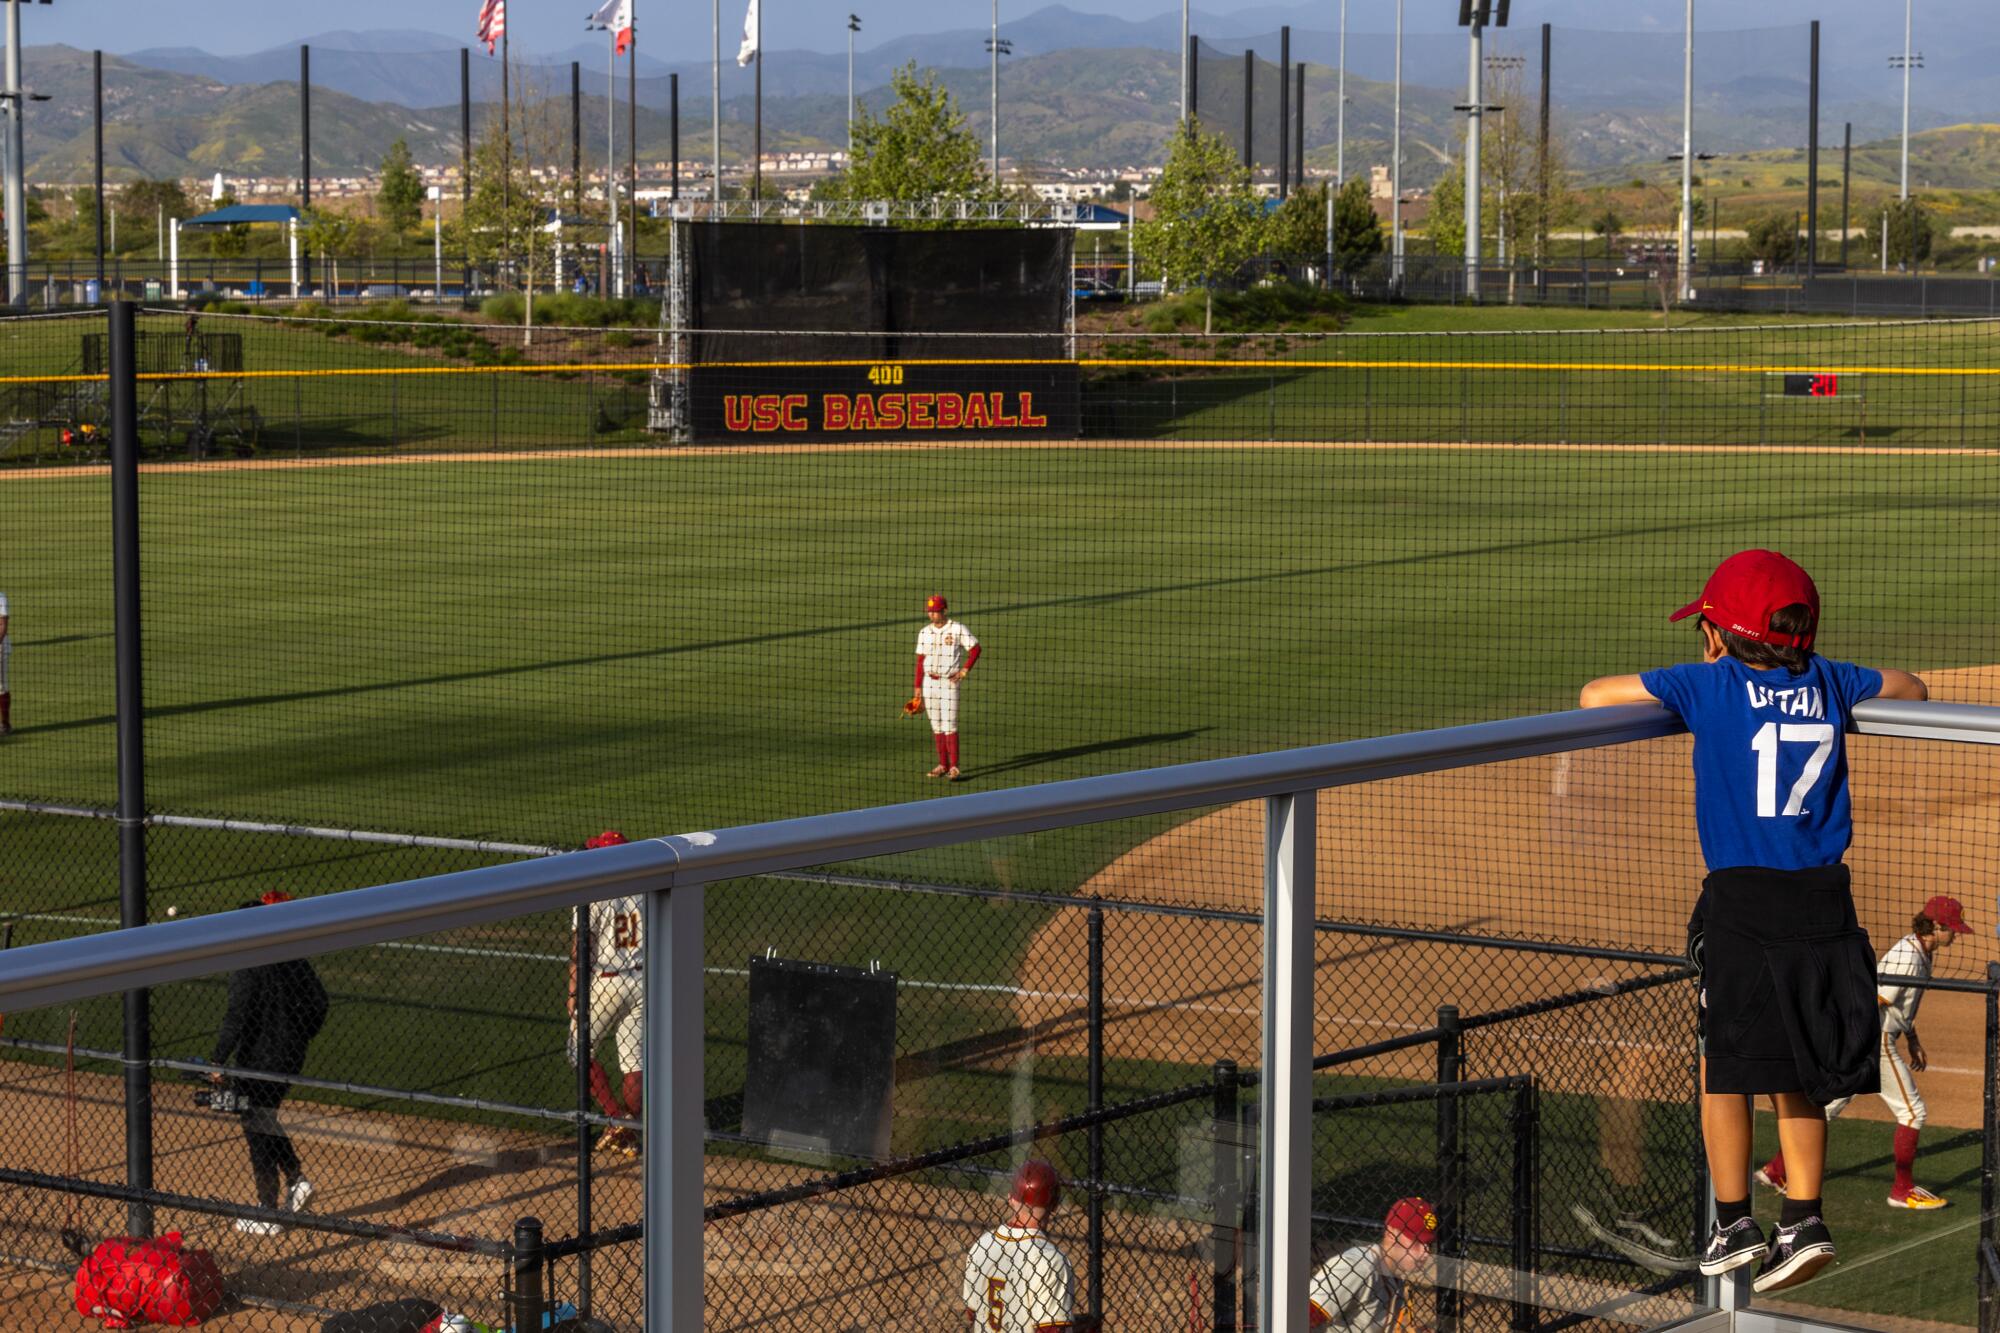 Tre Burkitt, 8, watches the USC baseball team warm up before a game with Cal at the Great Park in Irvine on May 3.